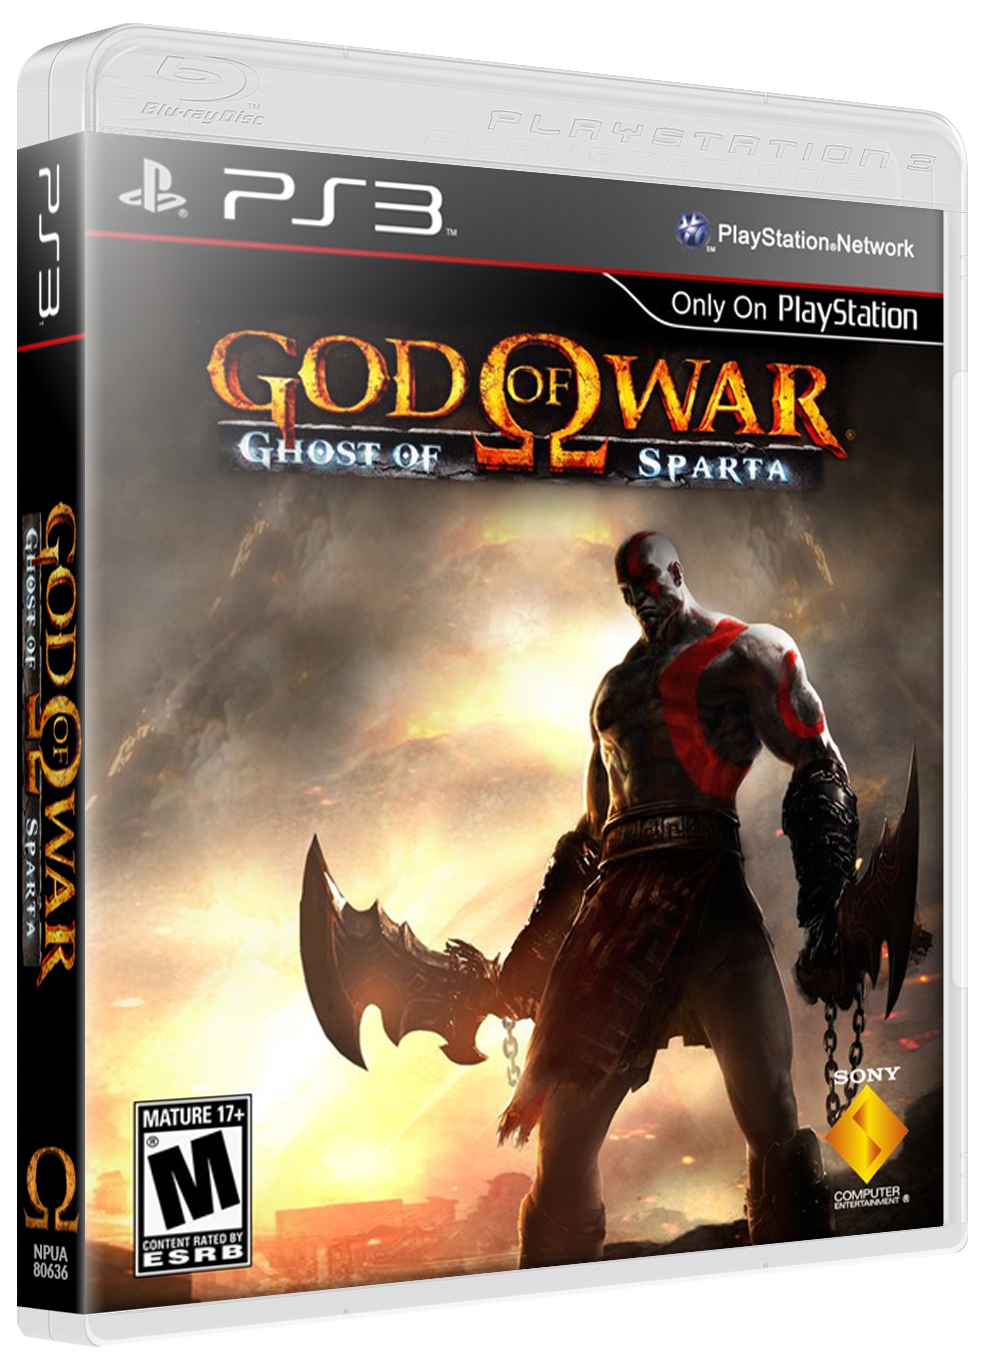 psp GOD OF WAR Ghost Of Sparta Game (Works On US Consoles) REGION FREE PAL  UK